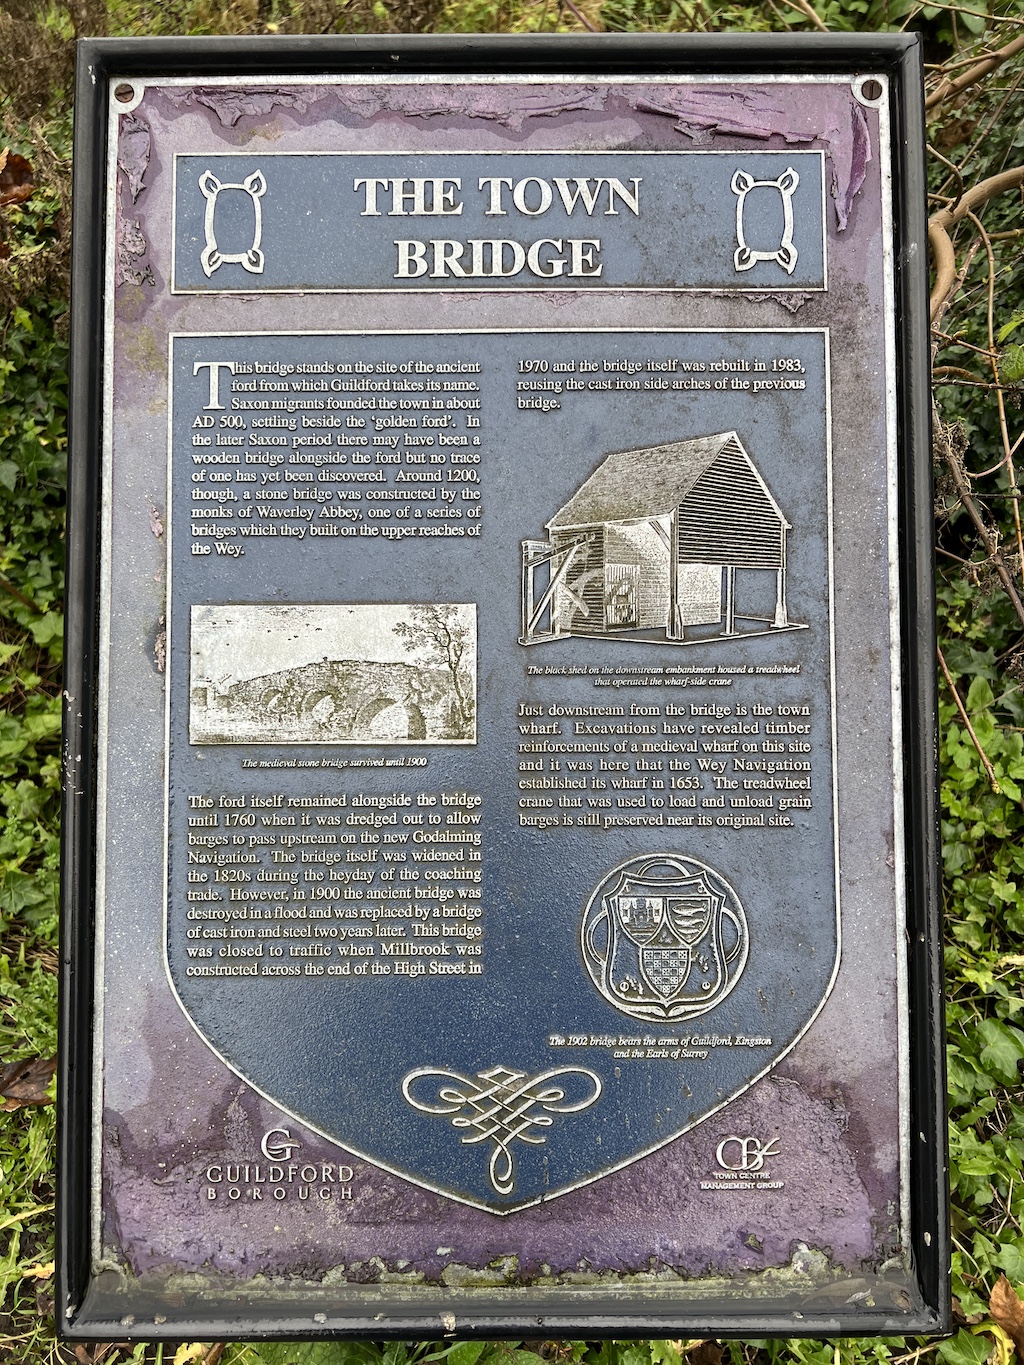 Blue plaque in Guildford for the Town Bridge